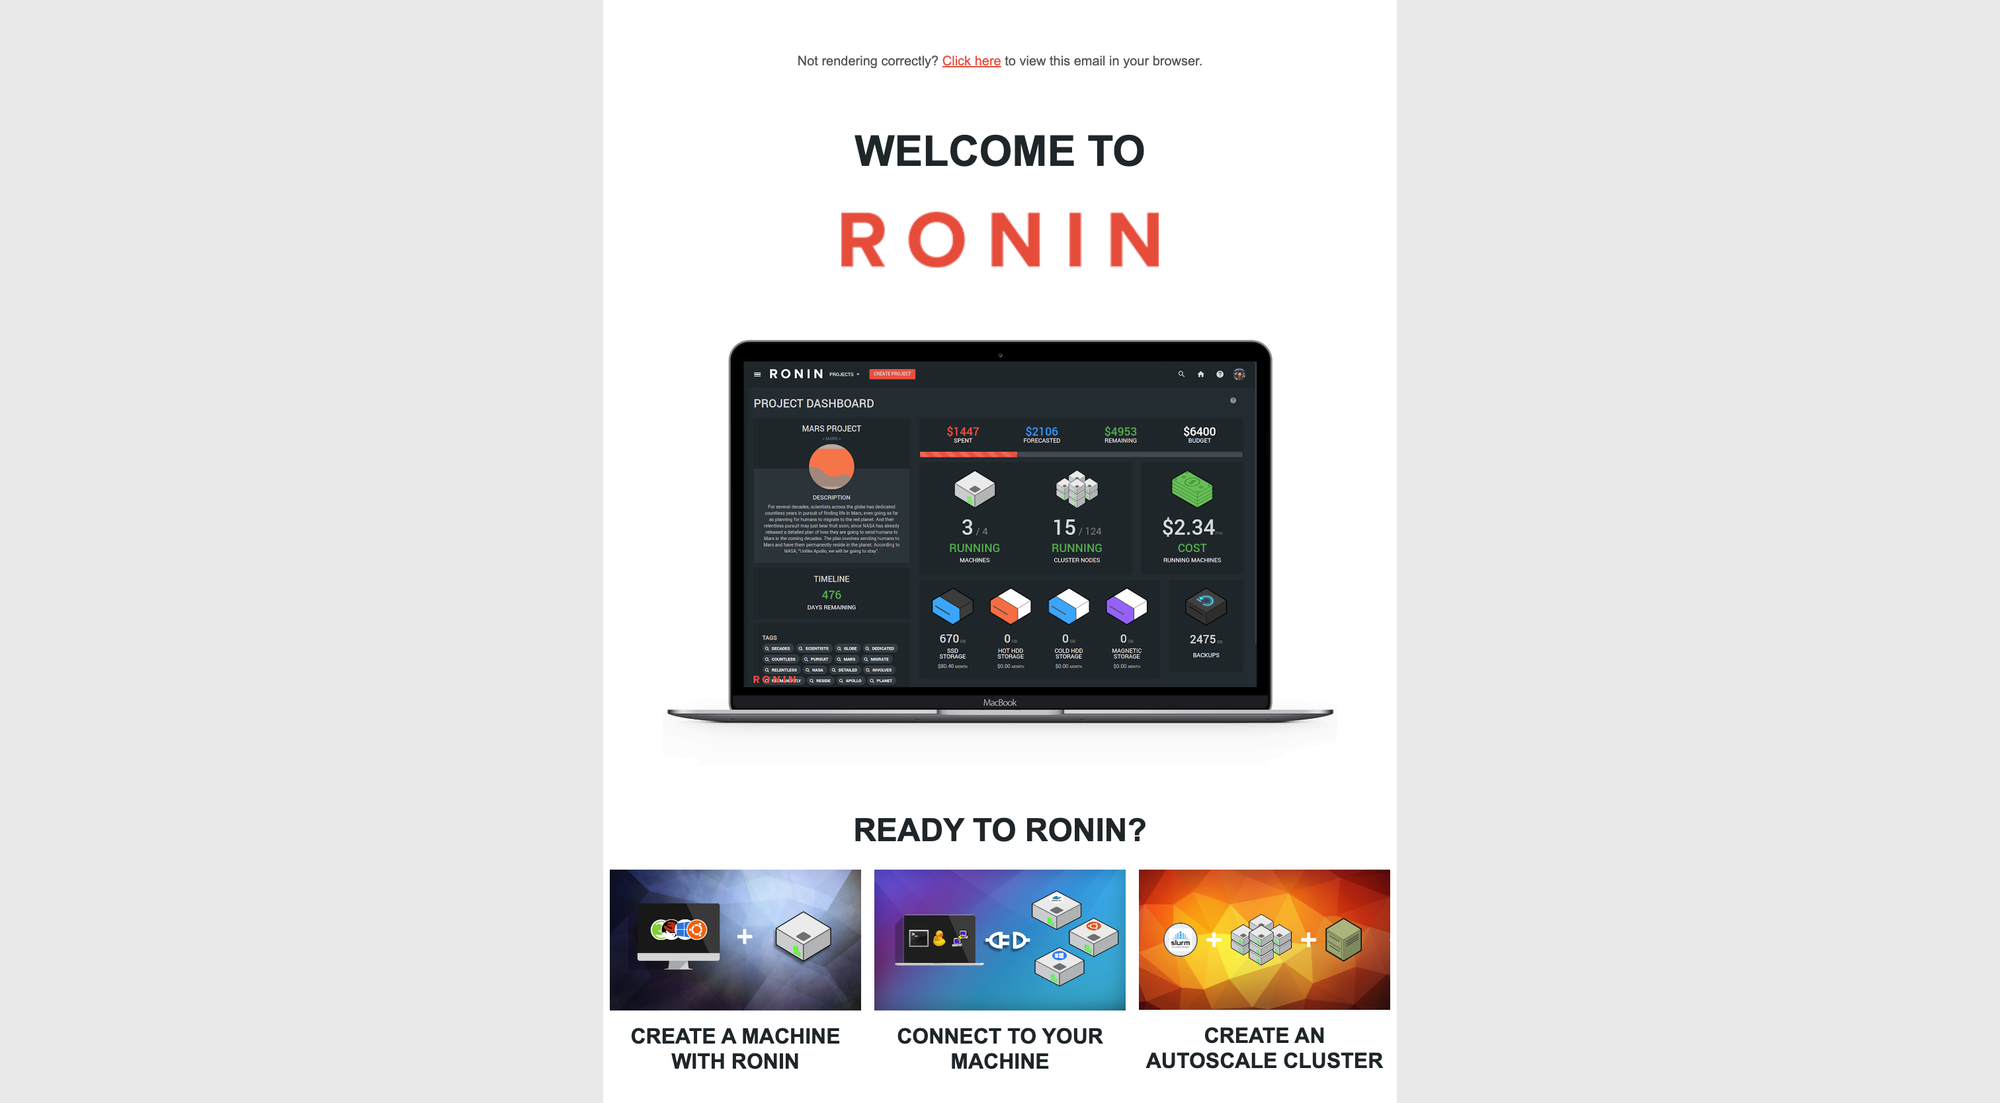 RONIN Release: Friday 31st March 2023